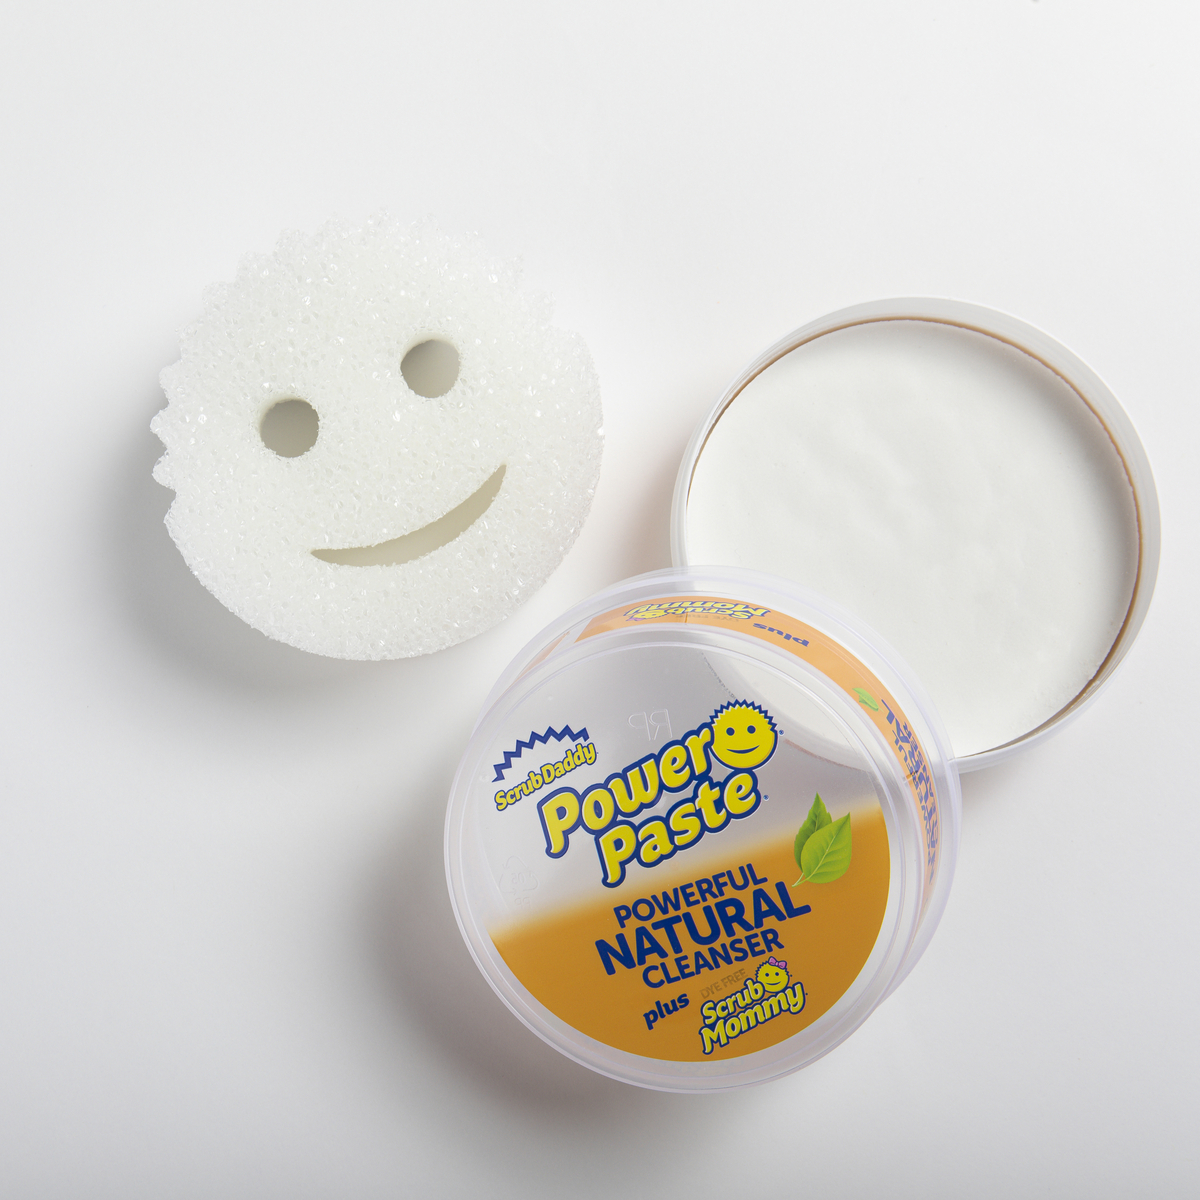 Scrub Daddy Power Paste Powerful Natural Cleanser, 9.3 oz